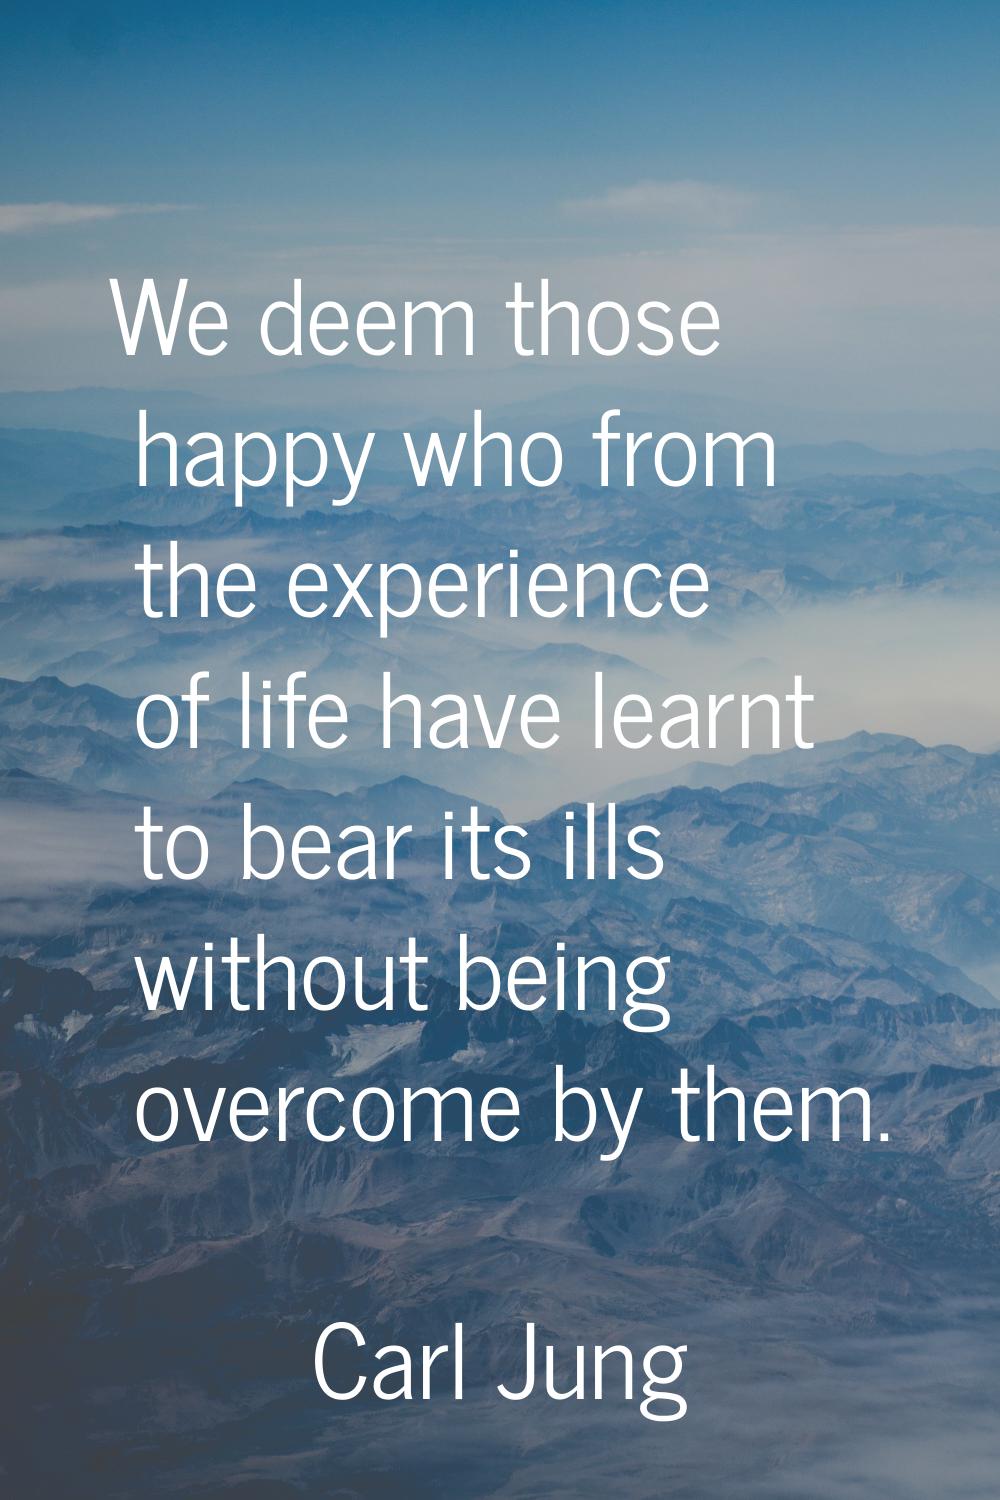 We deem those happy who from the experience of life have learnt to bear its ills without being over